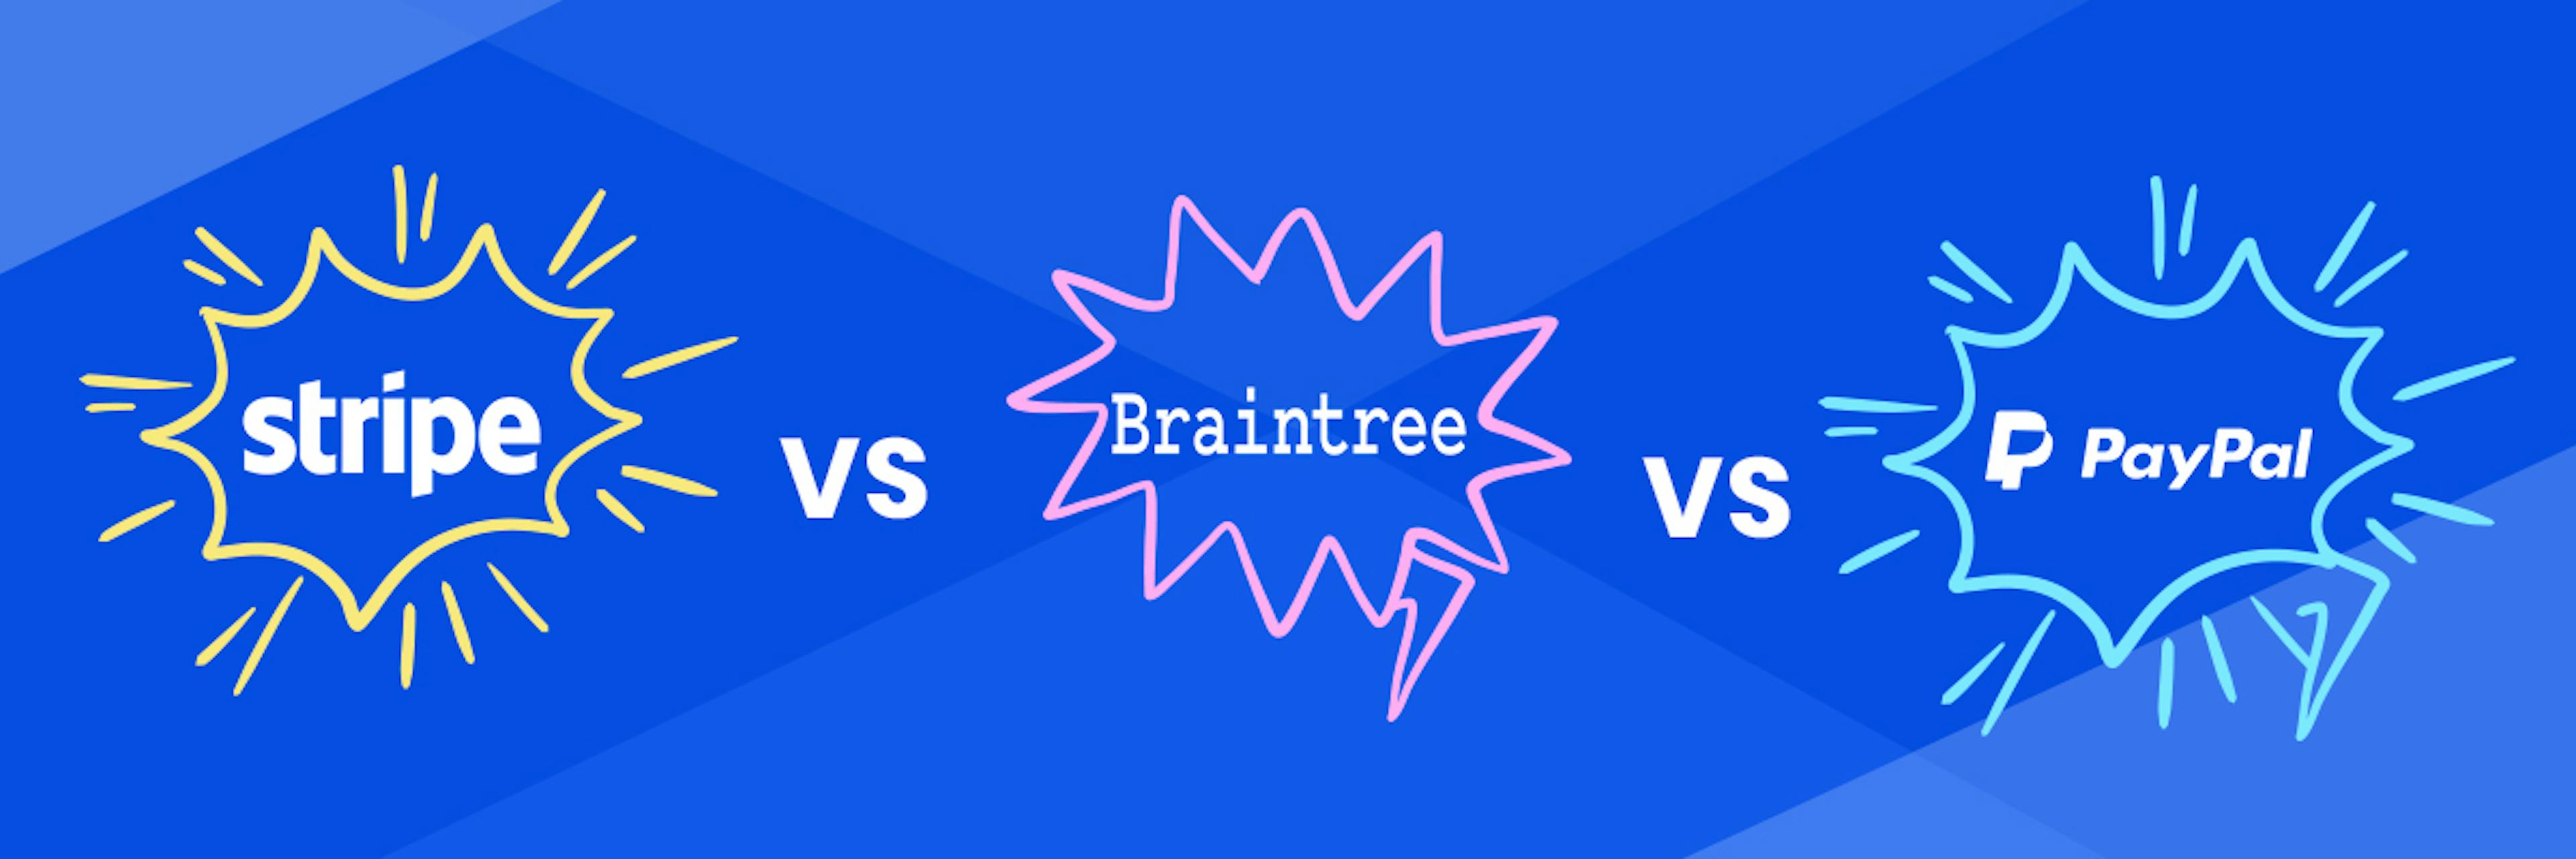 featured image - Stripe Vs. Braintree Vs. PayPal: Which Is The Best Payment Platform?